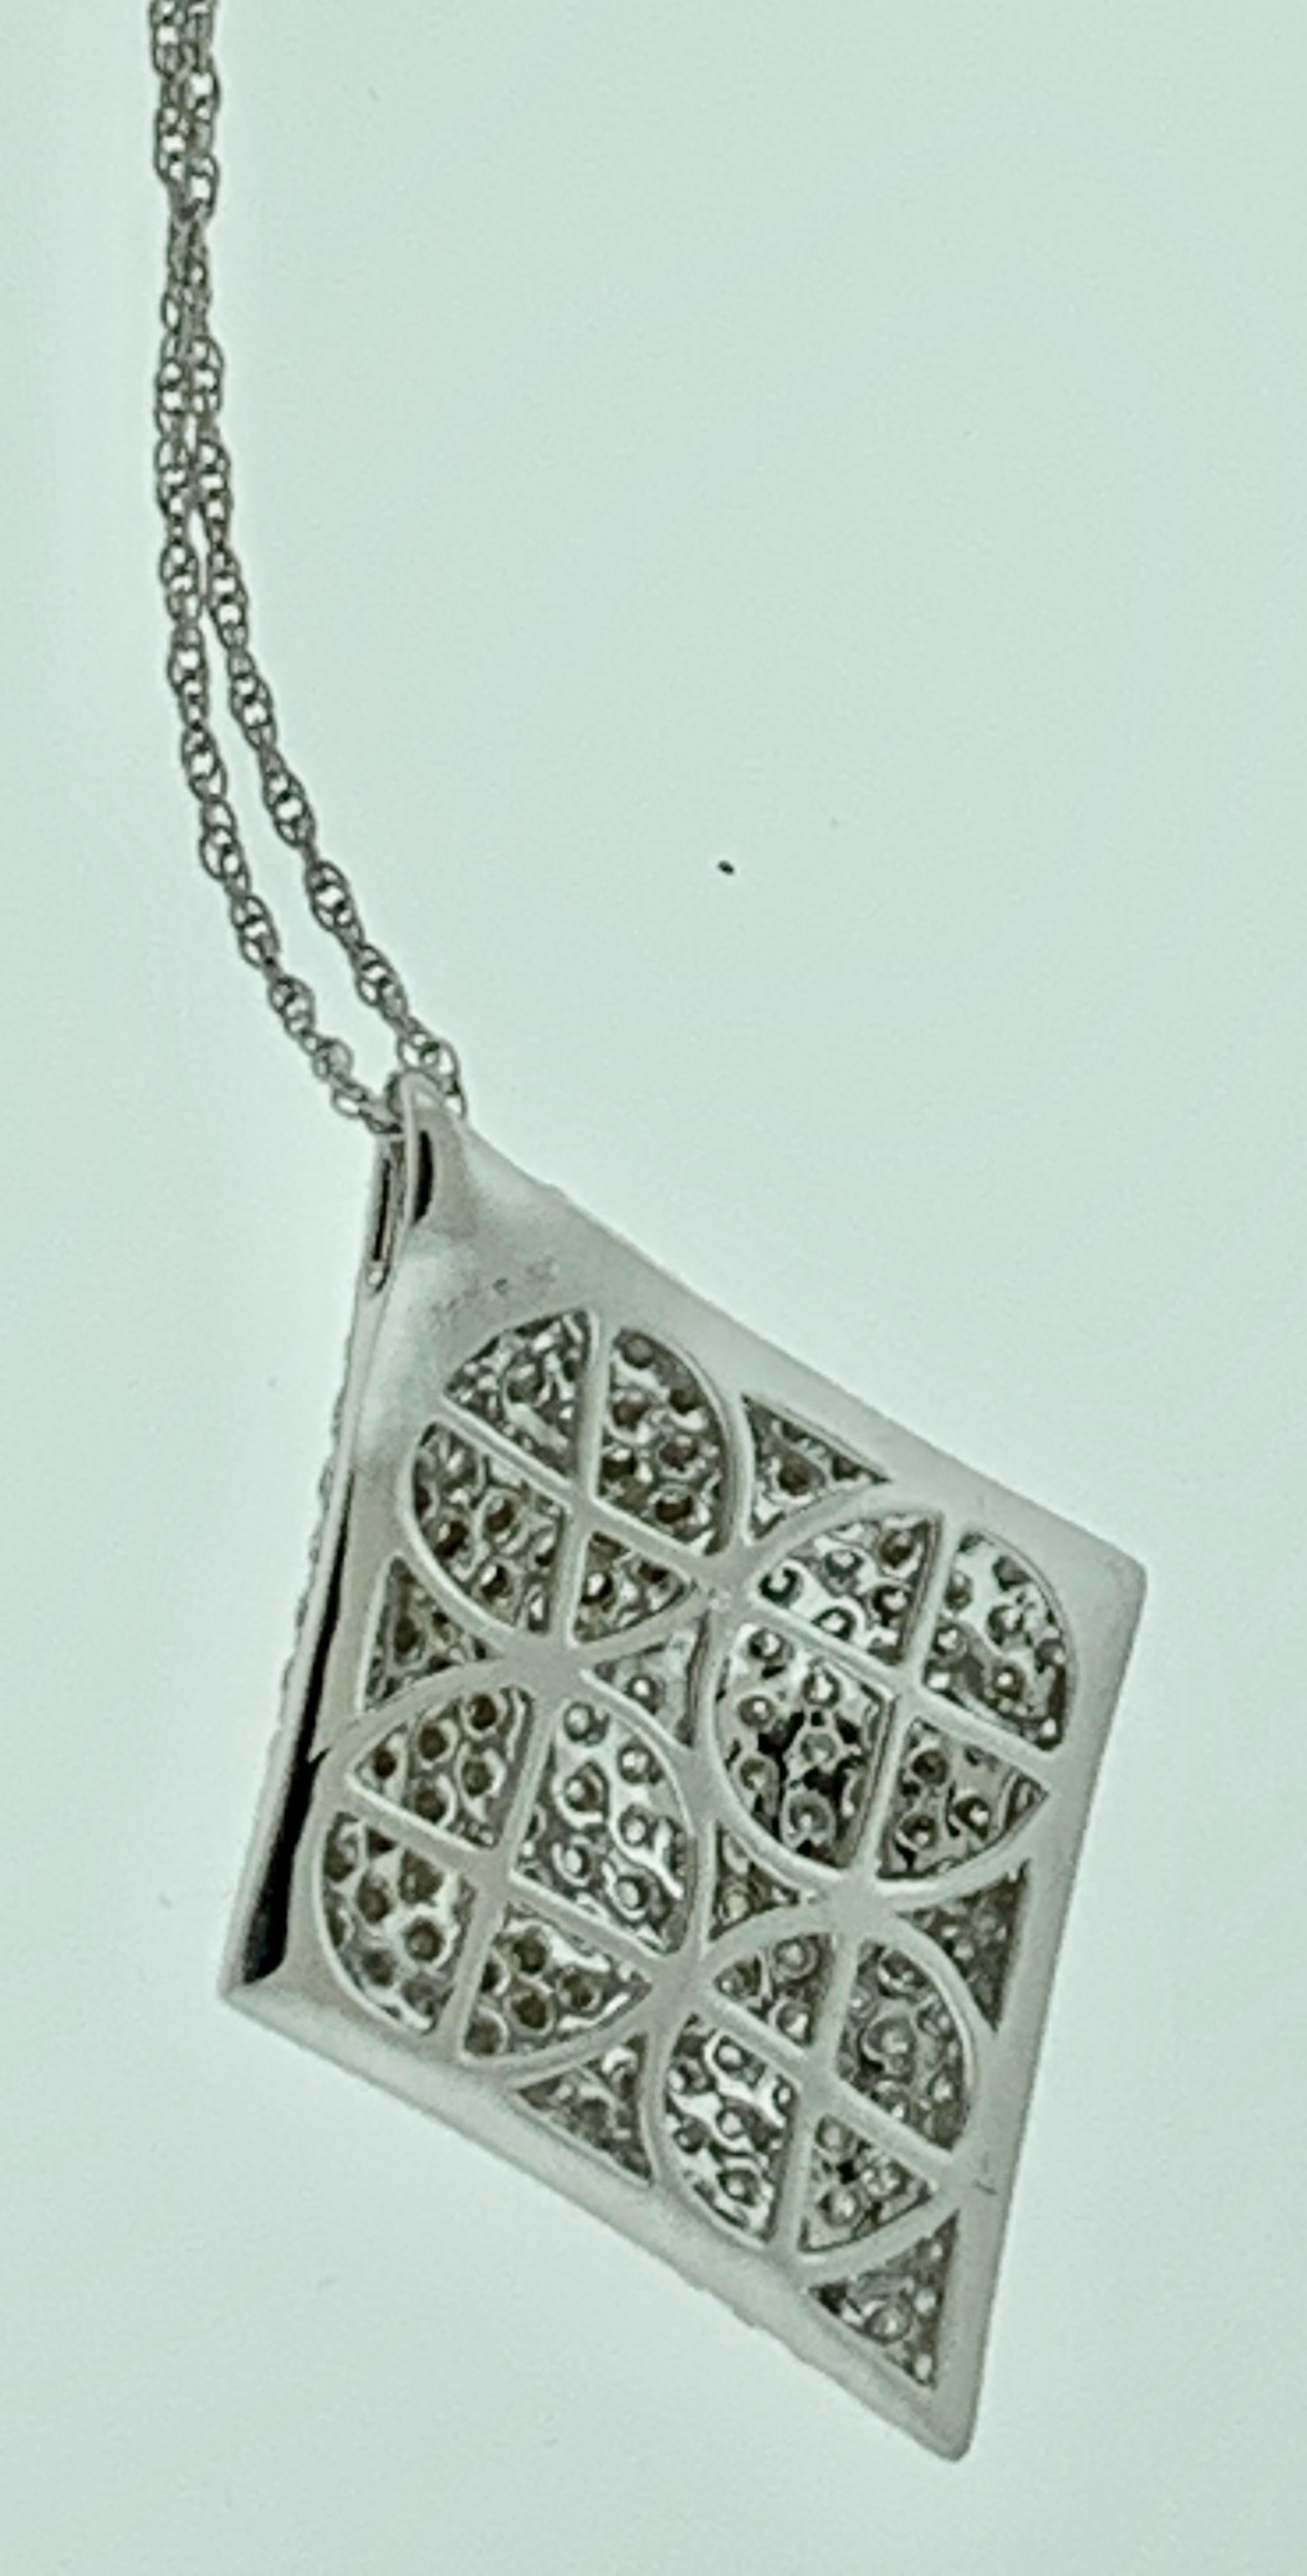 3.5 Carat VS/E Quality Diamond Pendant Necklace in 14 Karat White Gold In Excellent Condition For Sale In New York, NY